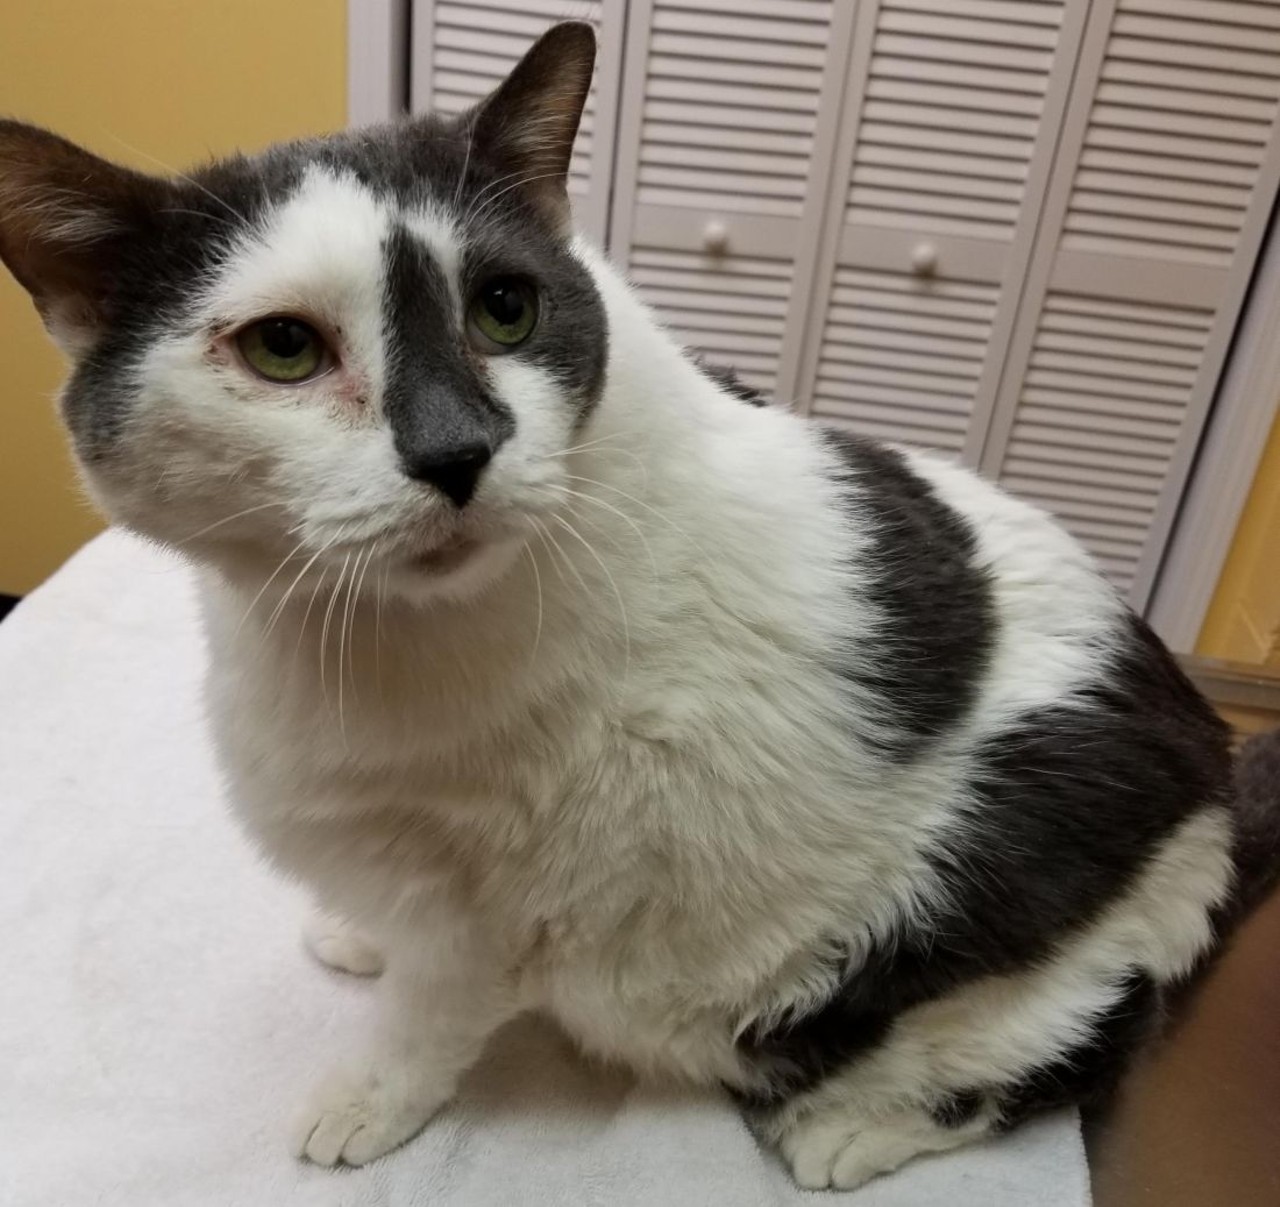 NAME: Toby
GENDER: Male
BREED: Domestic Short Hair
AGE: 12 years
WEIGHT: 20 pounds
SPECIAL CONSIDERATIONS: Children may startle him
REASON I CAME TO MHS: Agency transfer
LOCATION: Berman Center for Animal Care in Westland
ID NUMBER: 863052